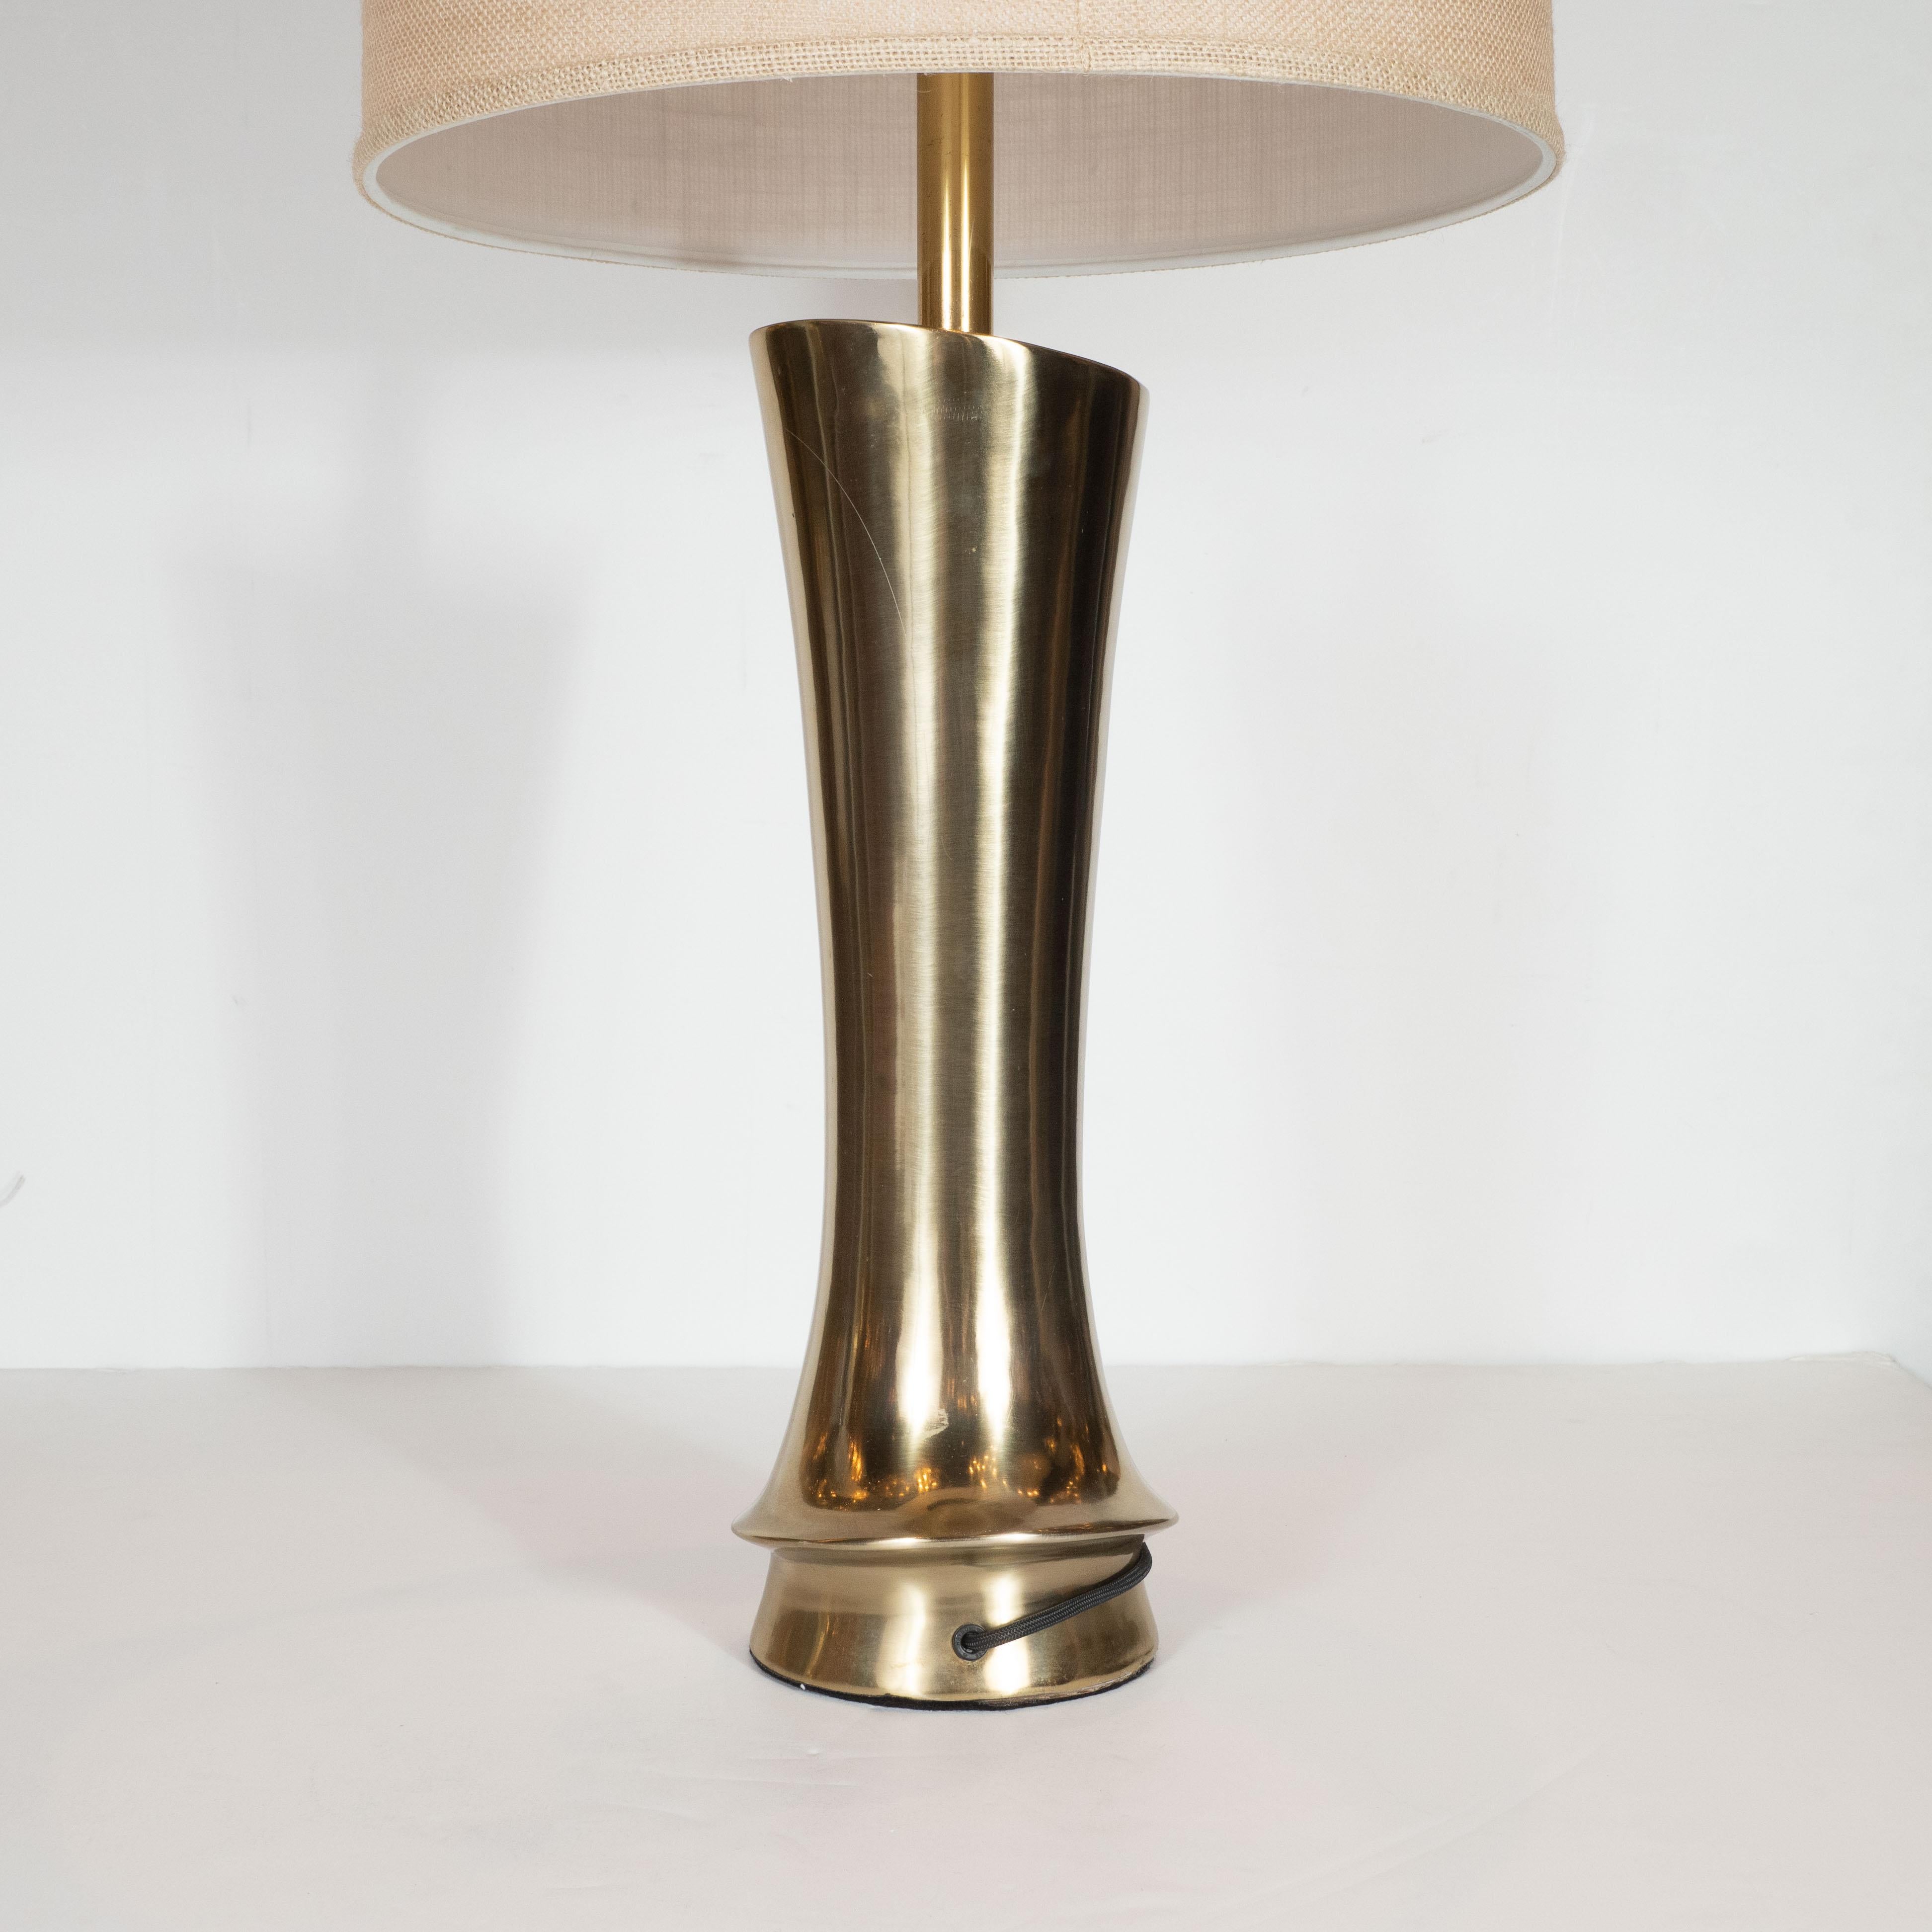 Pair of Midcentury Brass and Ebonized Walnut Table Lamps by Laurel & Co. 2